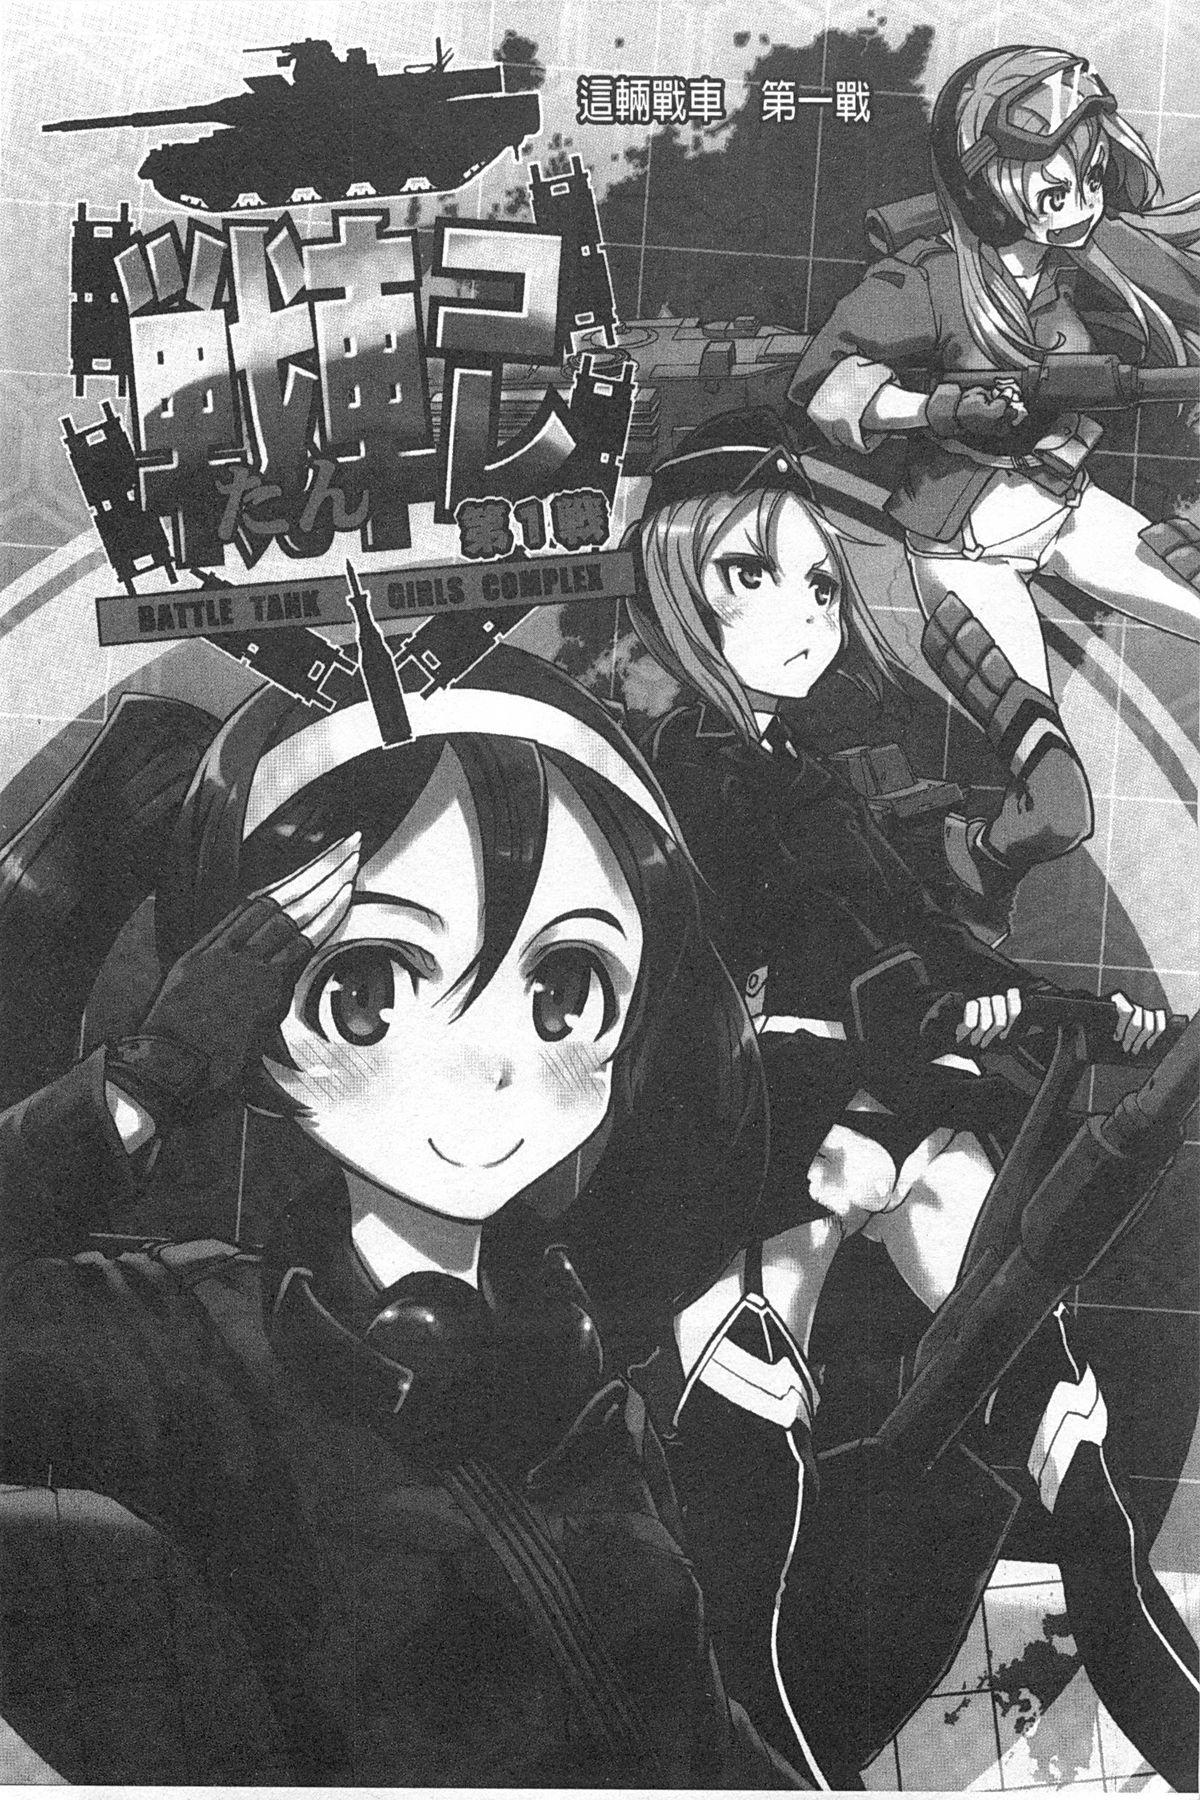 Leite Tancolle - Battle Tank Girls Complex | TAN COLLE戰車收藏 Stranger - Page 6